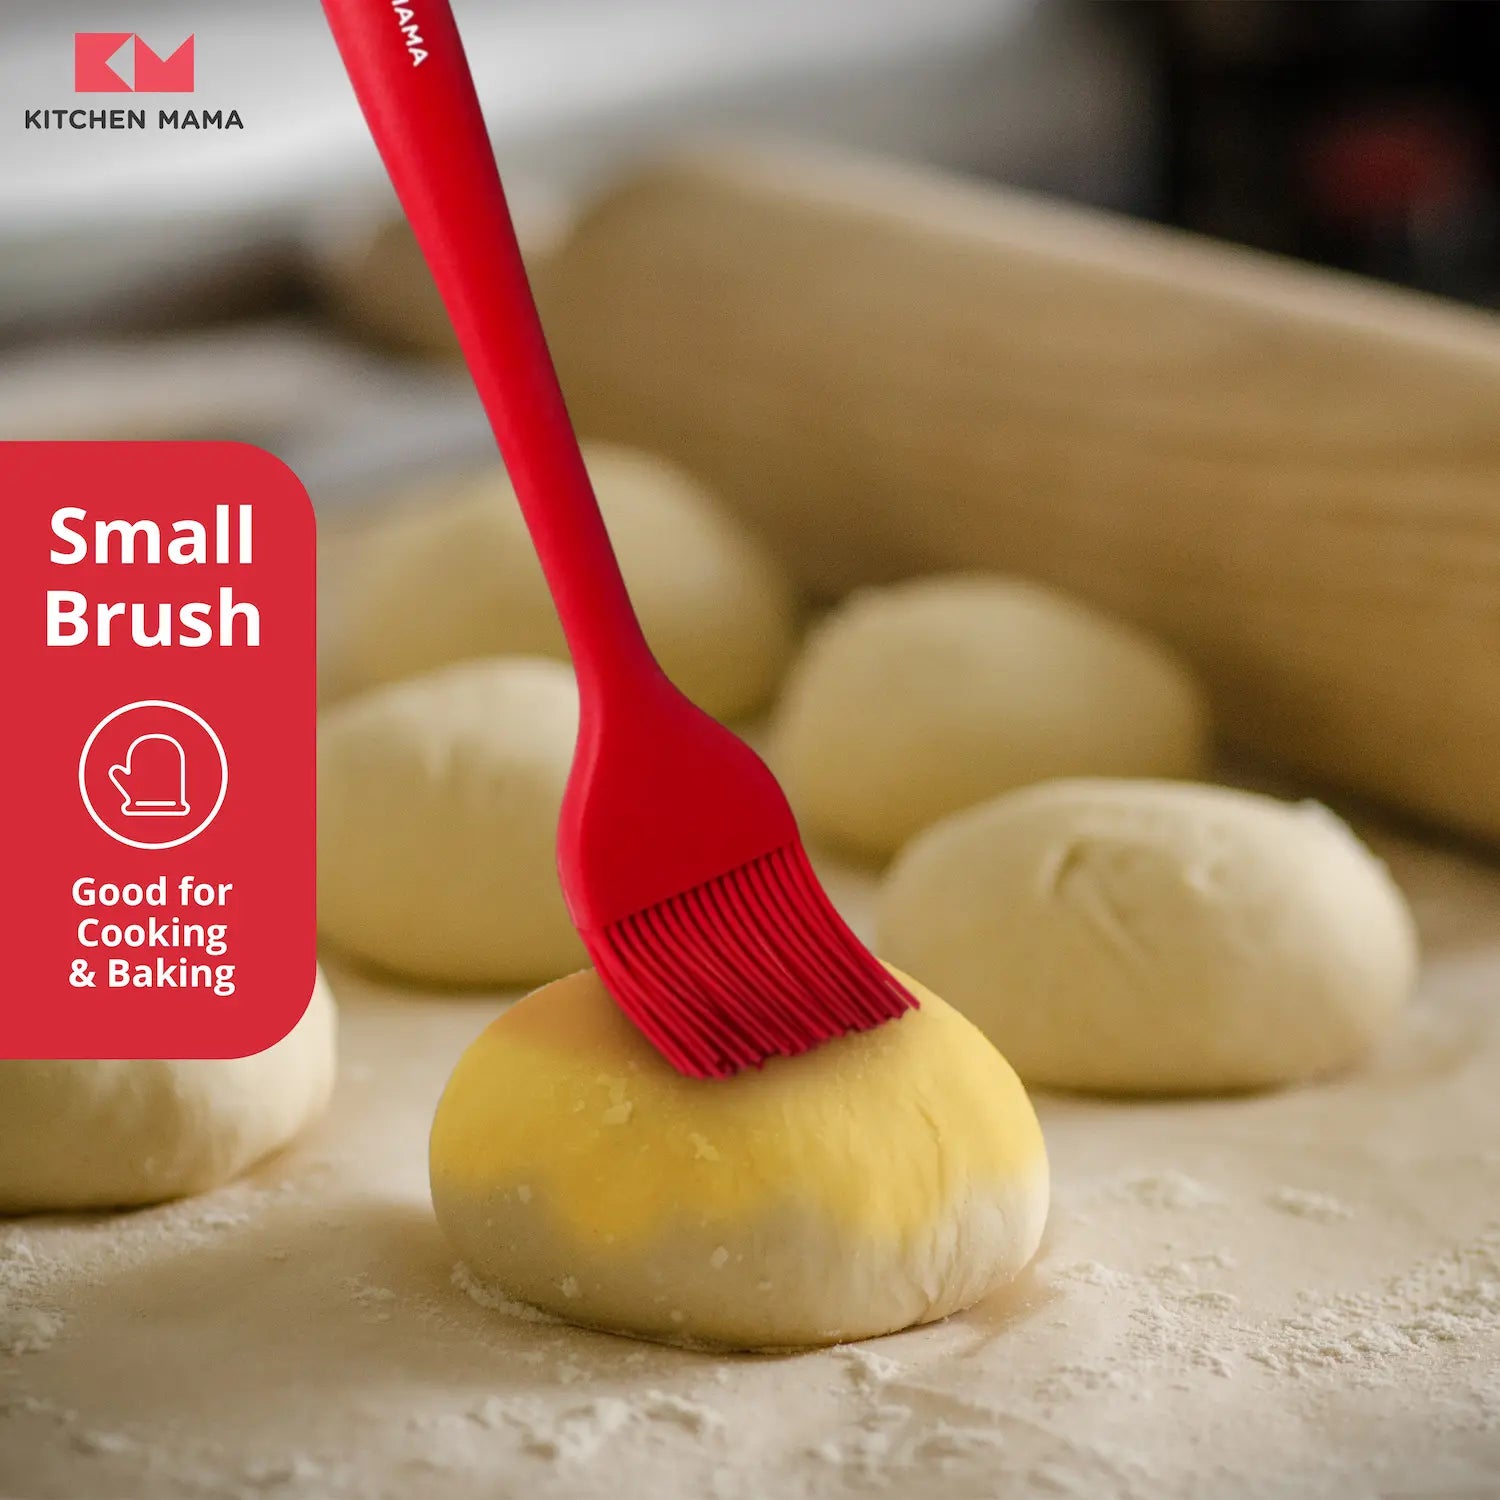 Kitchen Mama Silicone Basting Pastry Brush (A Set of 2), Red, SP0120-R, good for baking